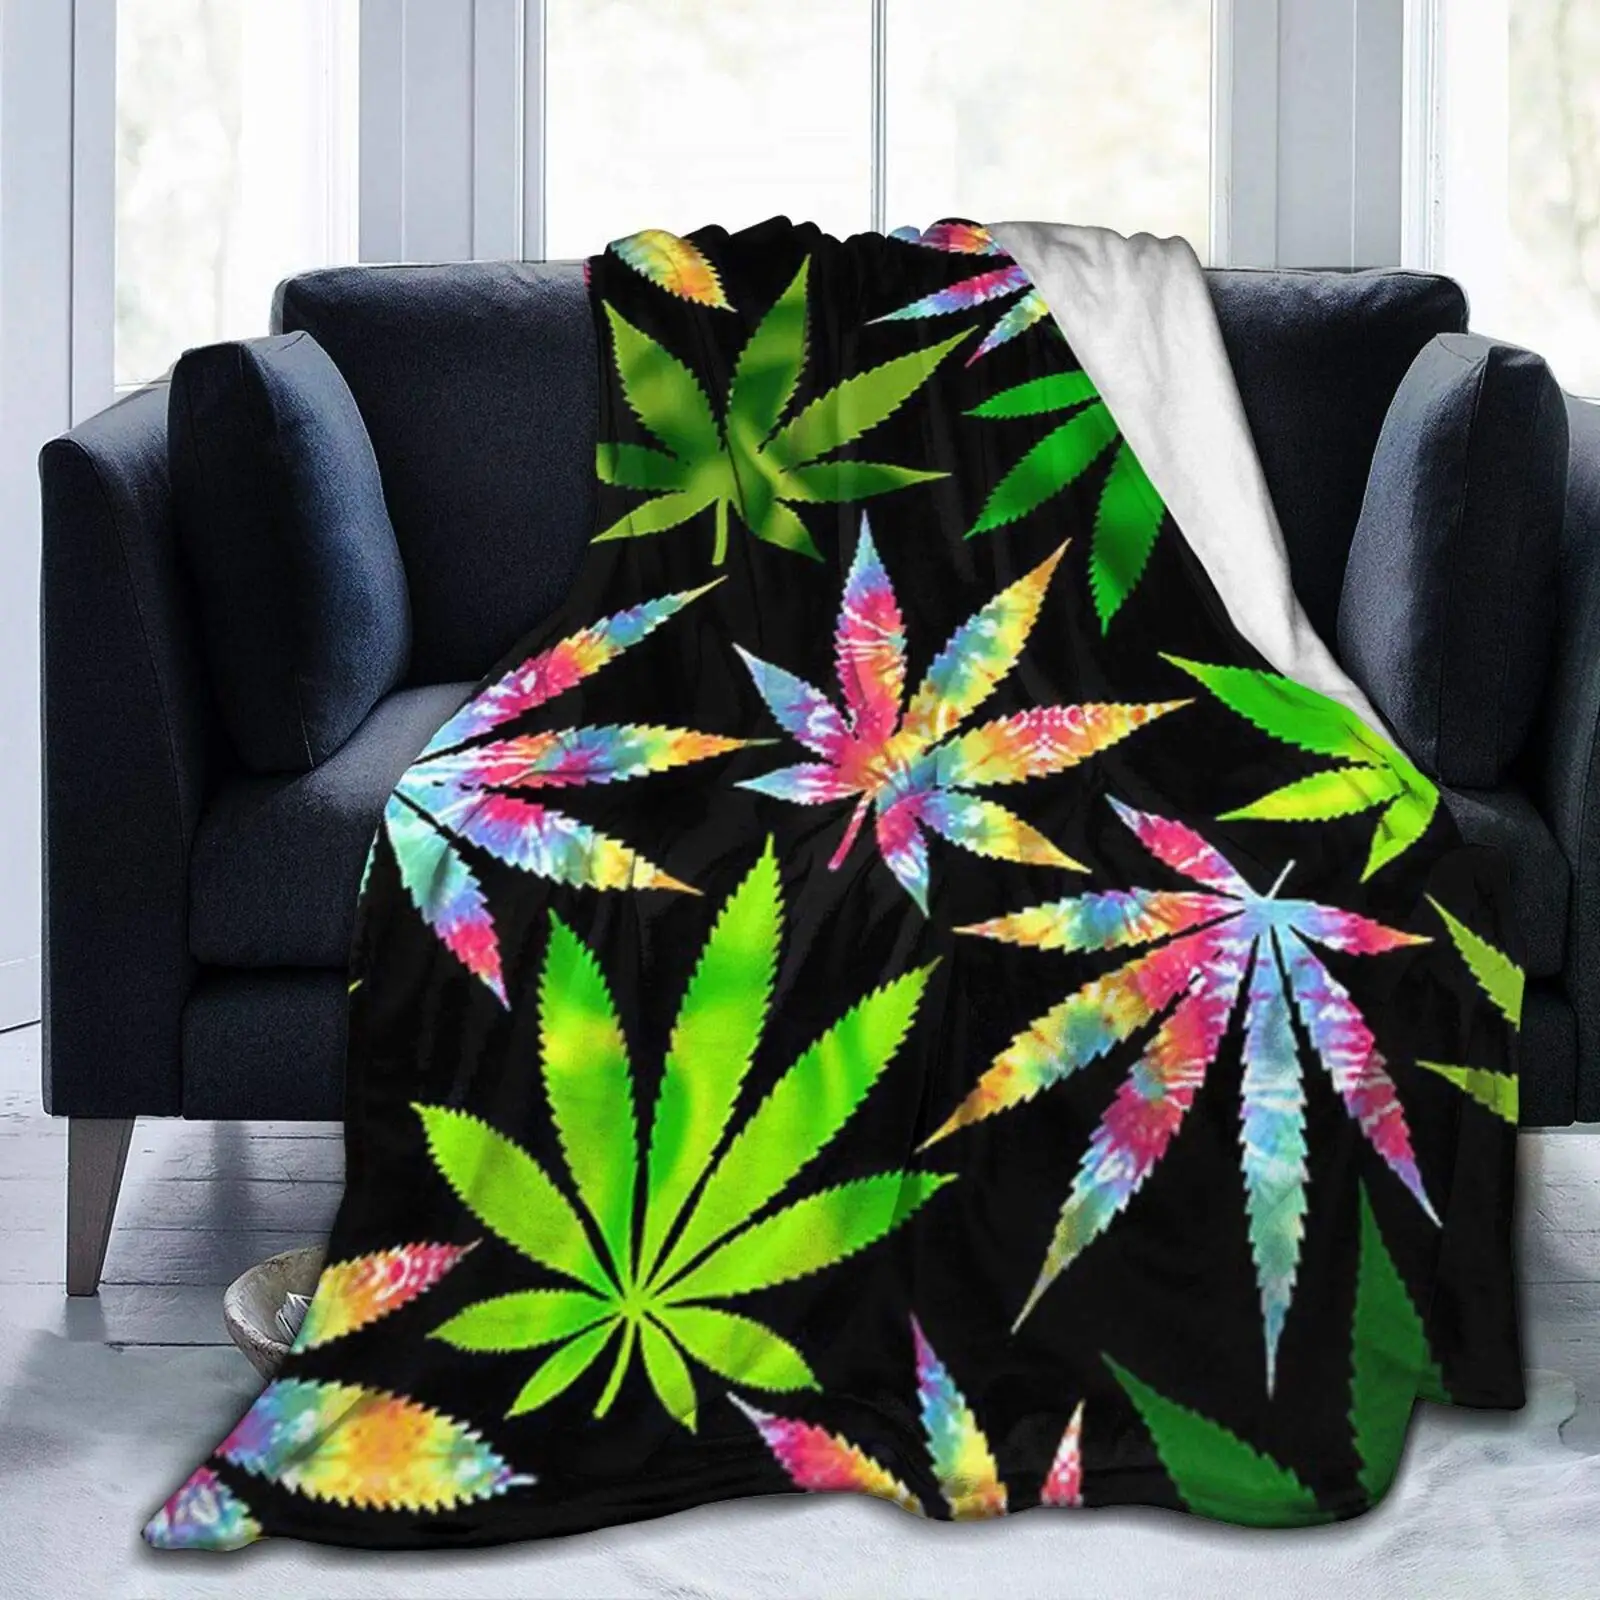 

Autumn Maple Fallen Leaves Throw Blanket Cozy Flannel Fleece Super Soft Lightweight Bed Couch Bedroom King Size Blanket for Sofa